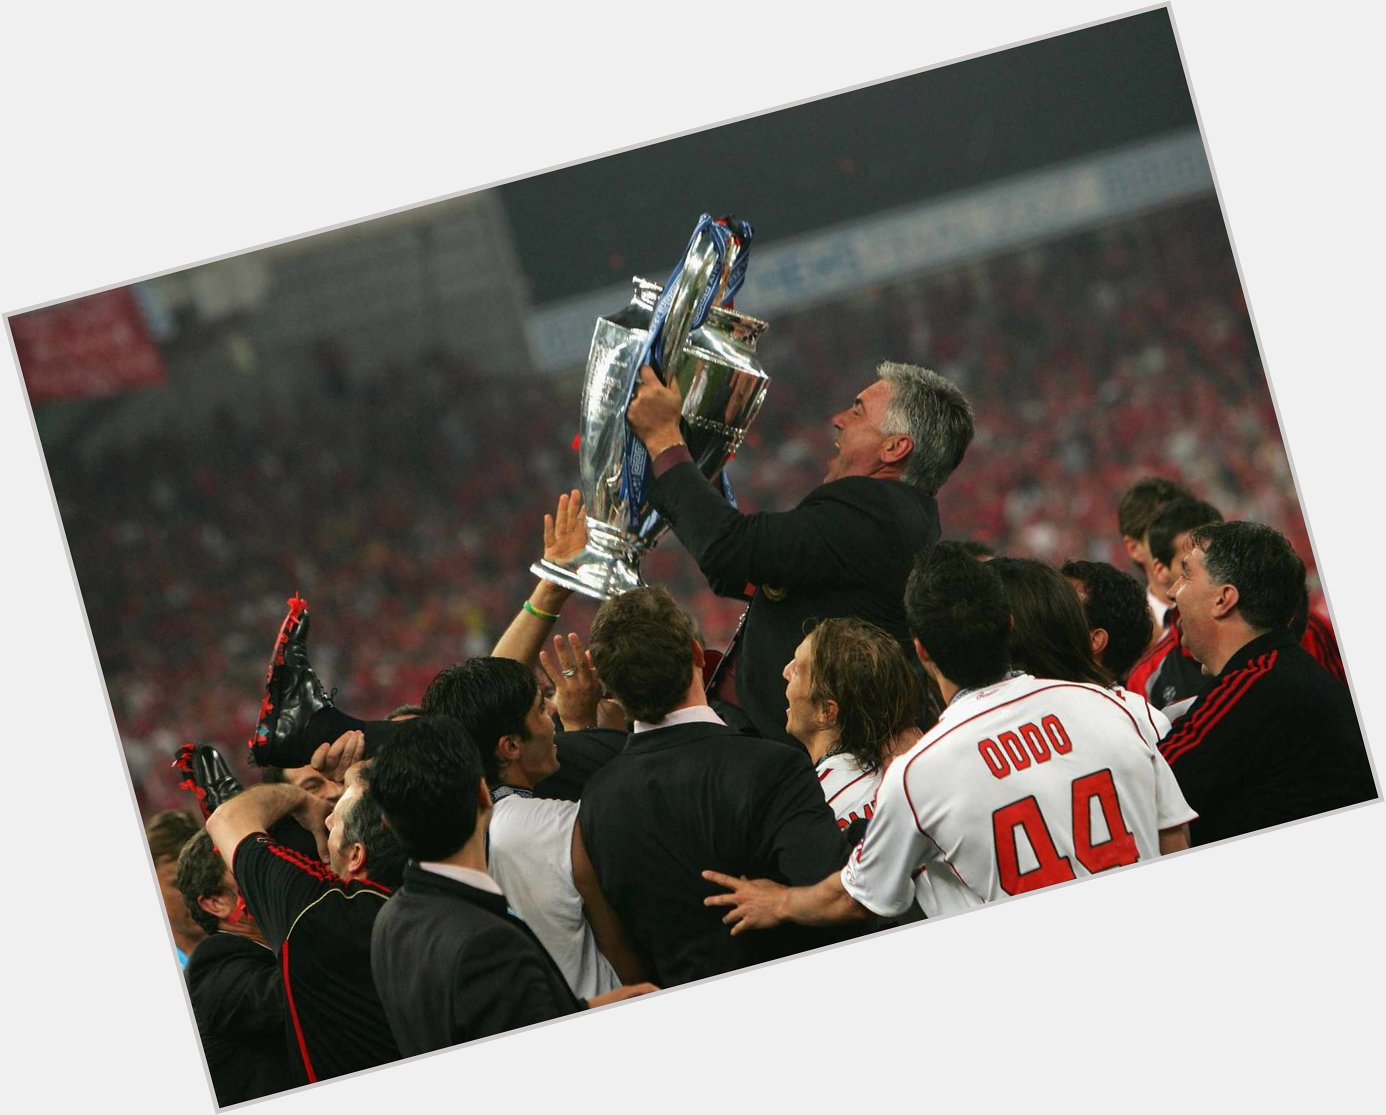 Happy birthday to Carlo Ancelotti, who turns 64 today Simply one of the greatest coaches of all-time  